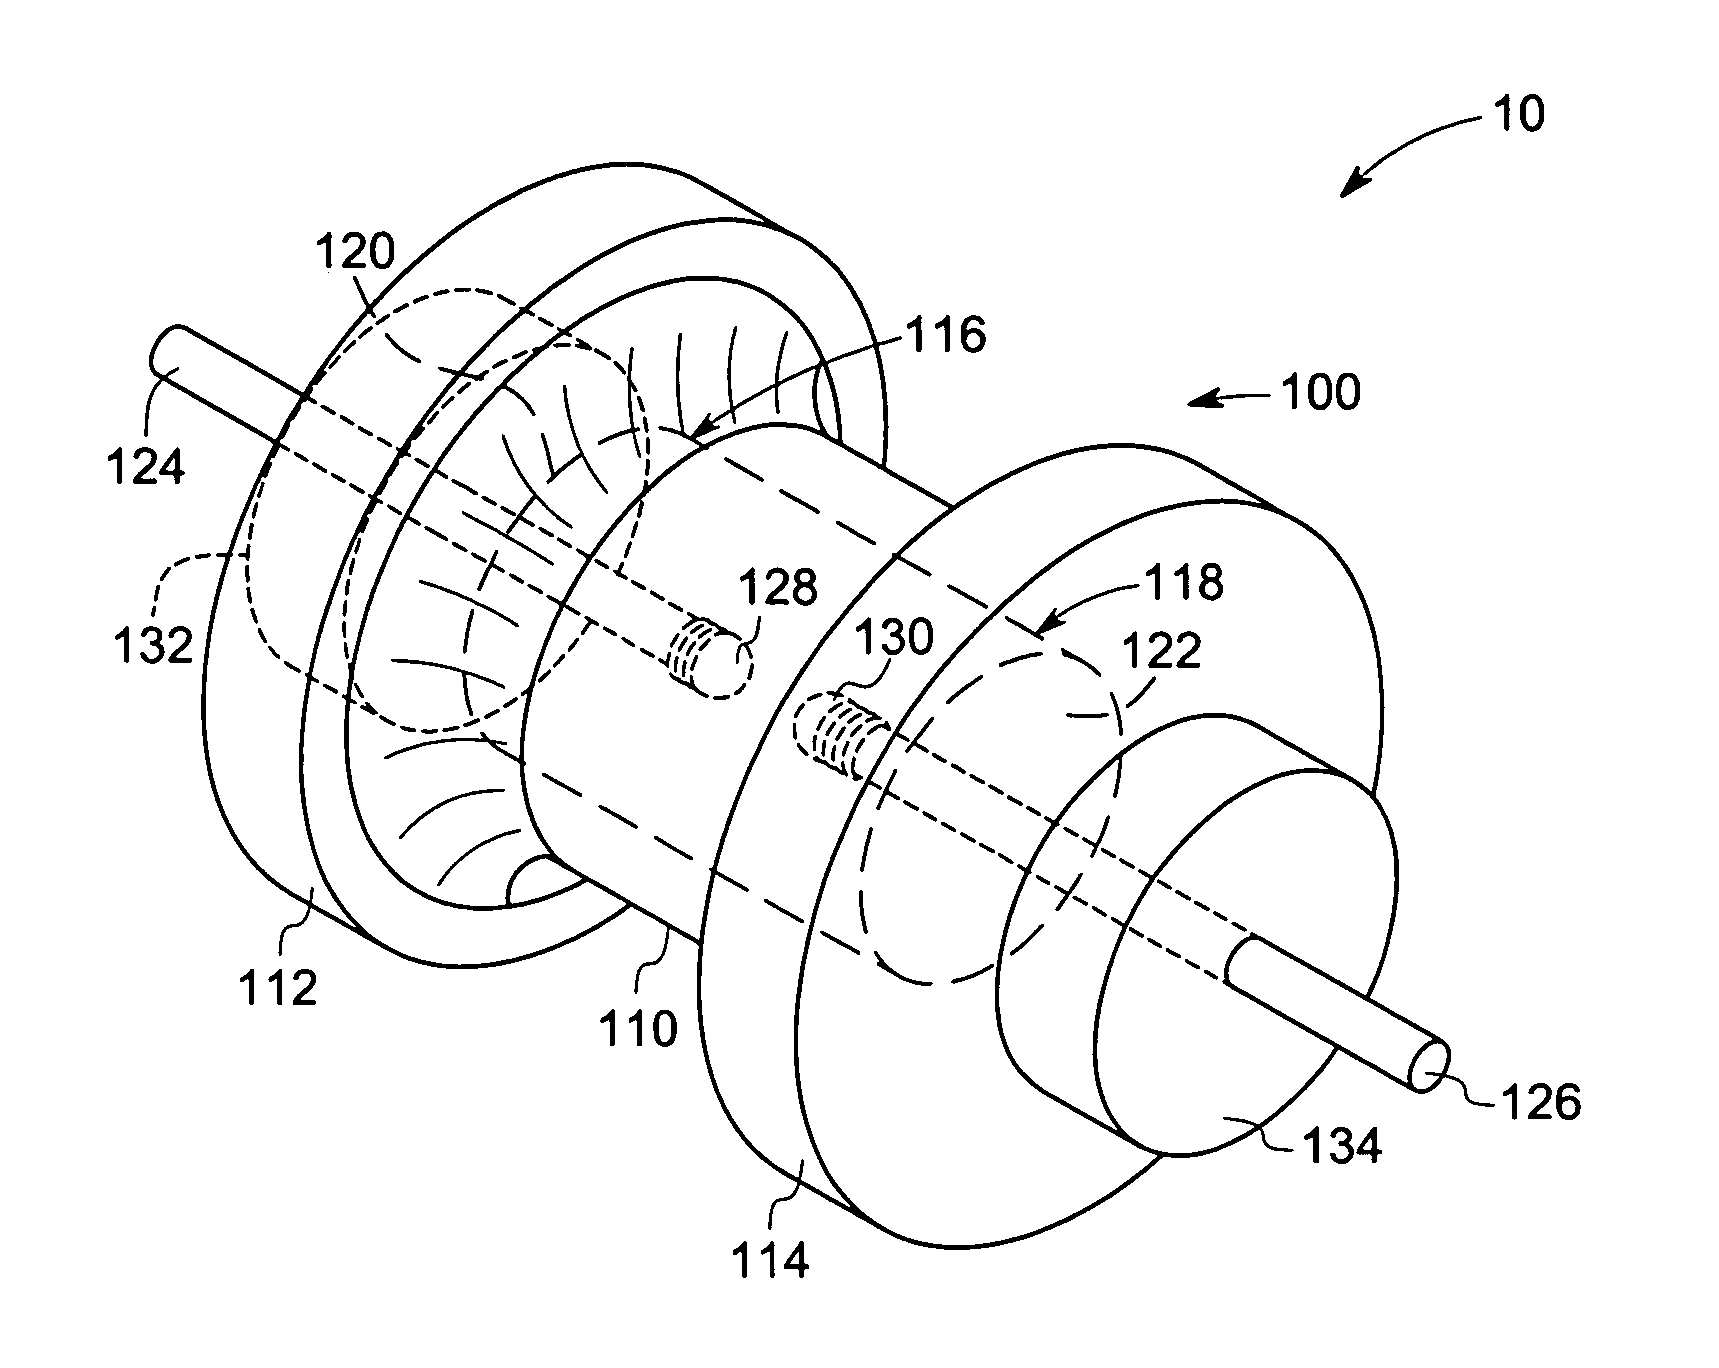 Ceramic lamp having molybdenum-rhenium end cap and systems and methods therewith